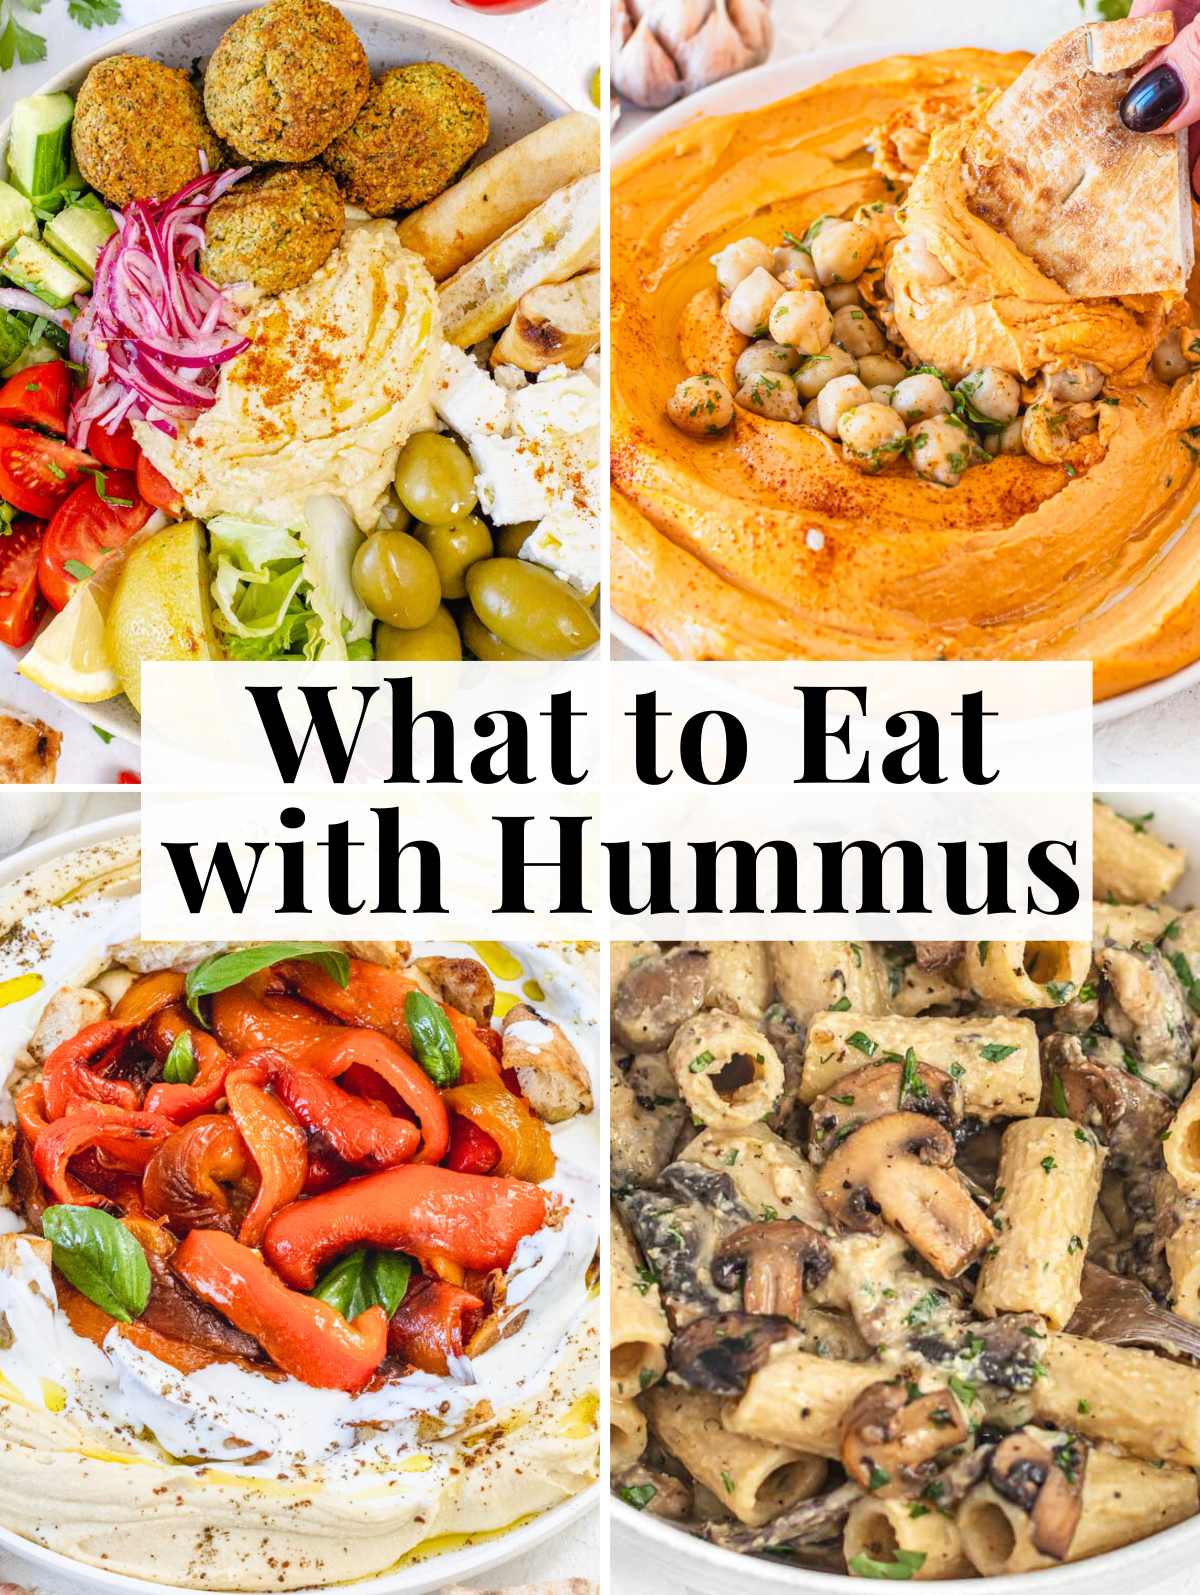 what to eat with hummus: salads, pasta, and vegetables